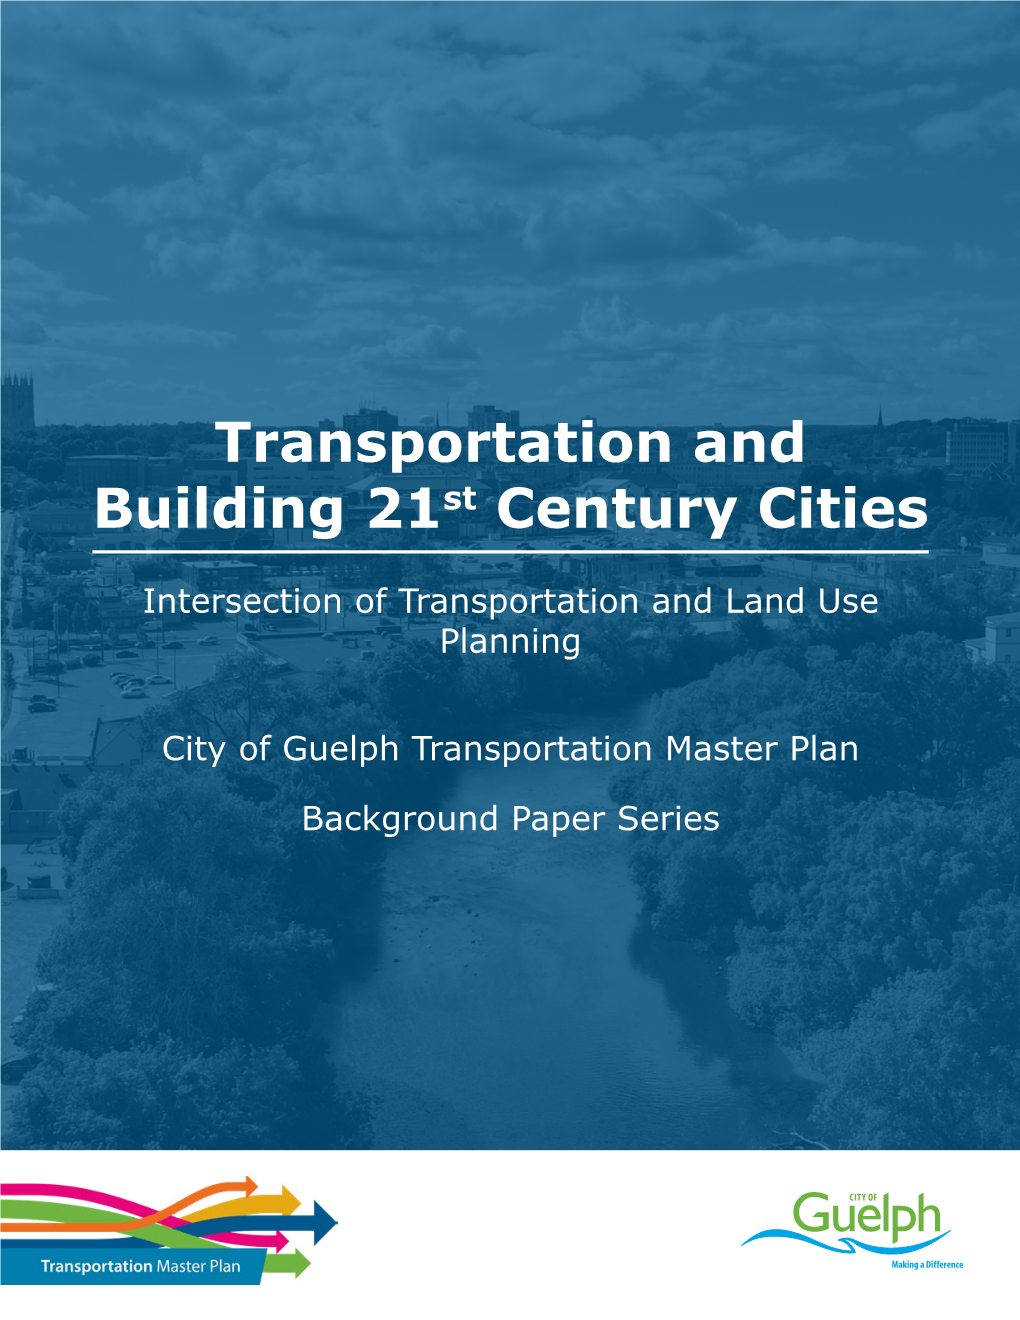 Transportation and Land Use Planning Background Paper